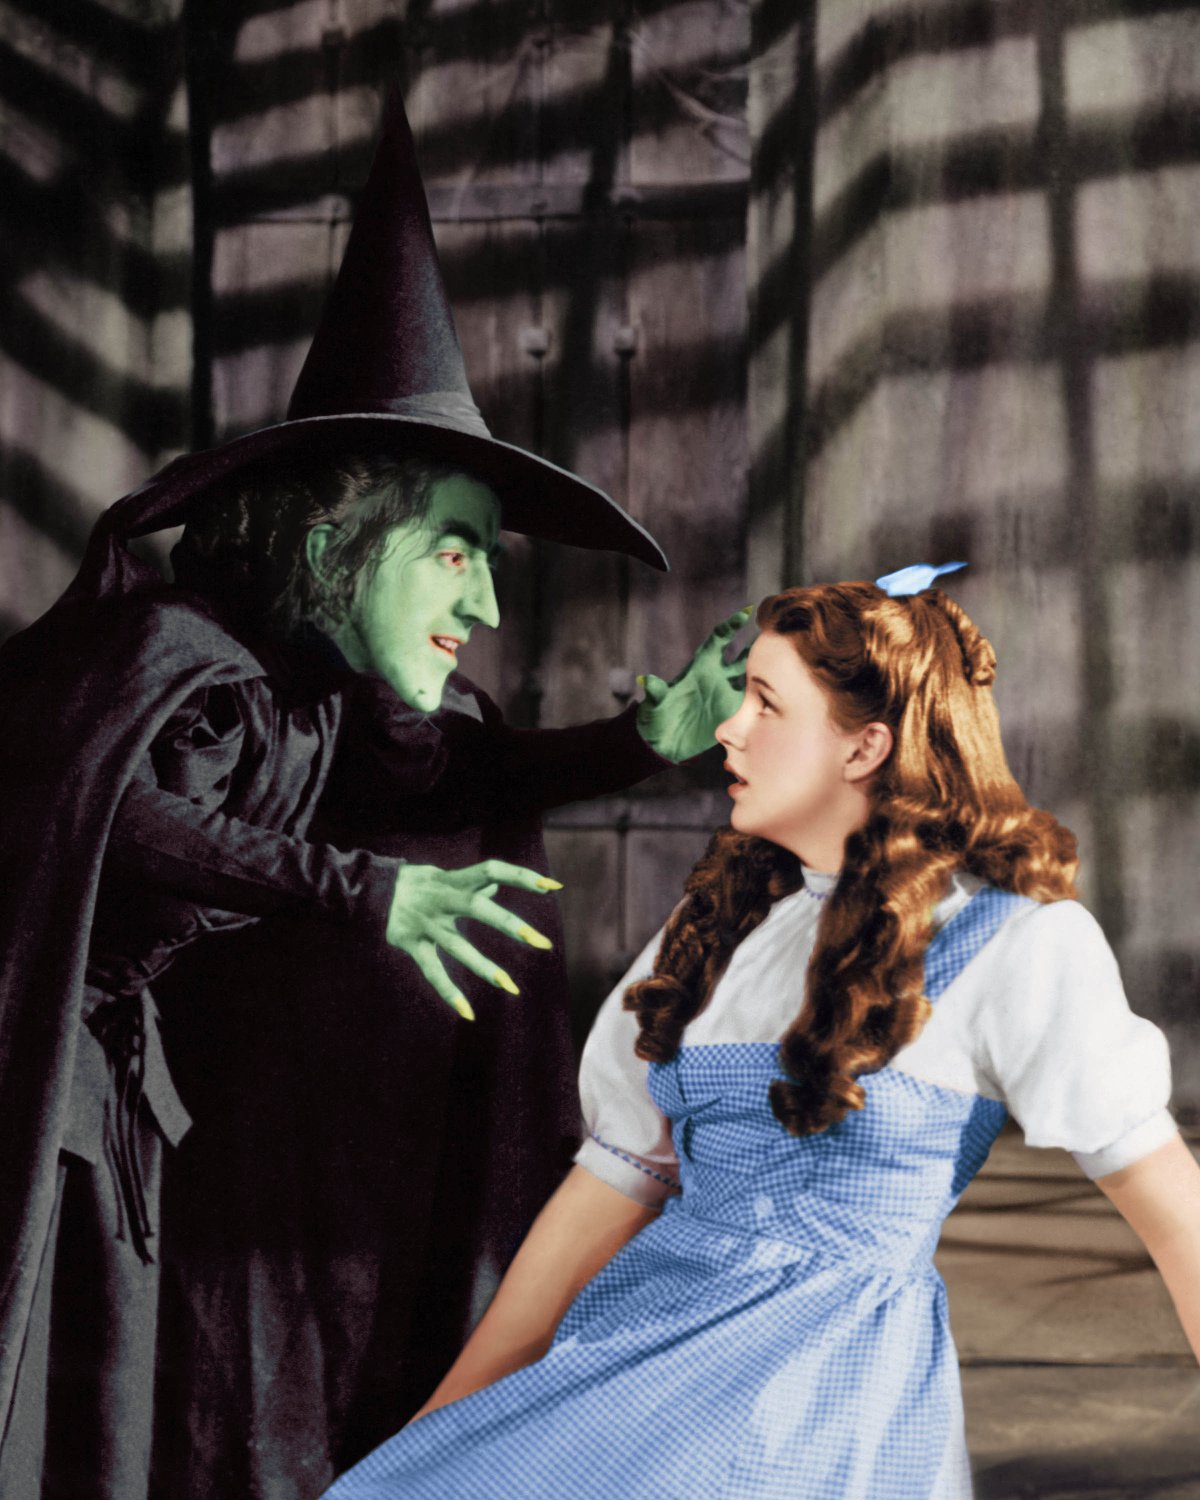 Margaret Hamilton (1902 - 1985) as the Wicked Witch and Judy Garland (1922 - 1969) as Dorothy Gale in 'The Wizard of Oz', 1939.